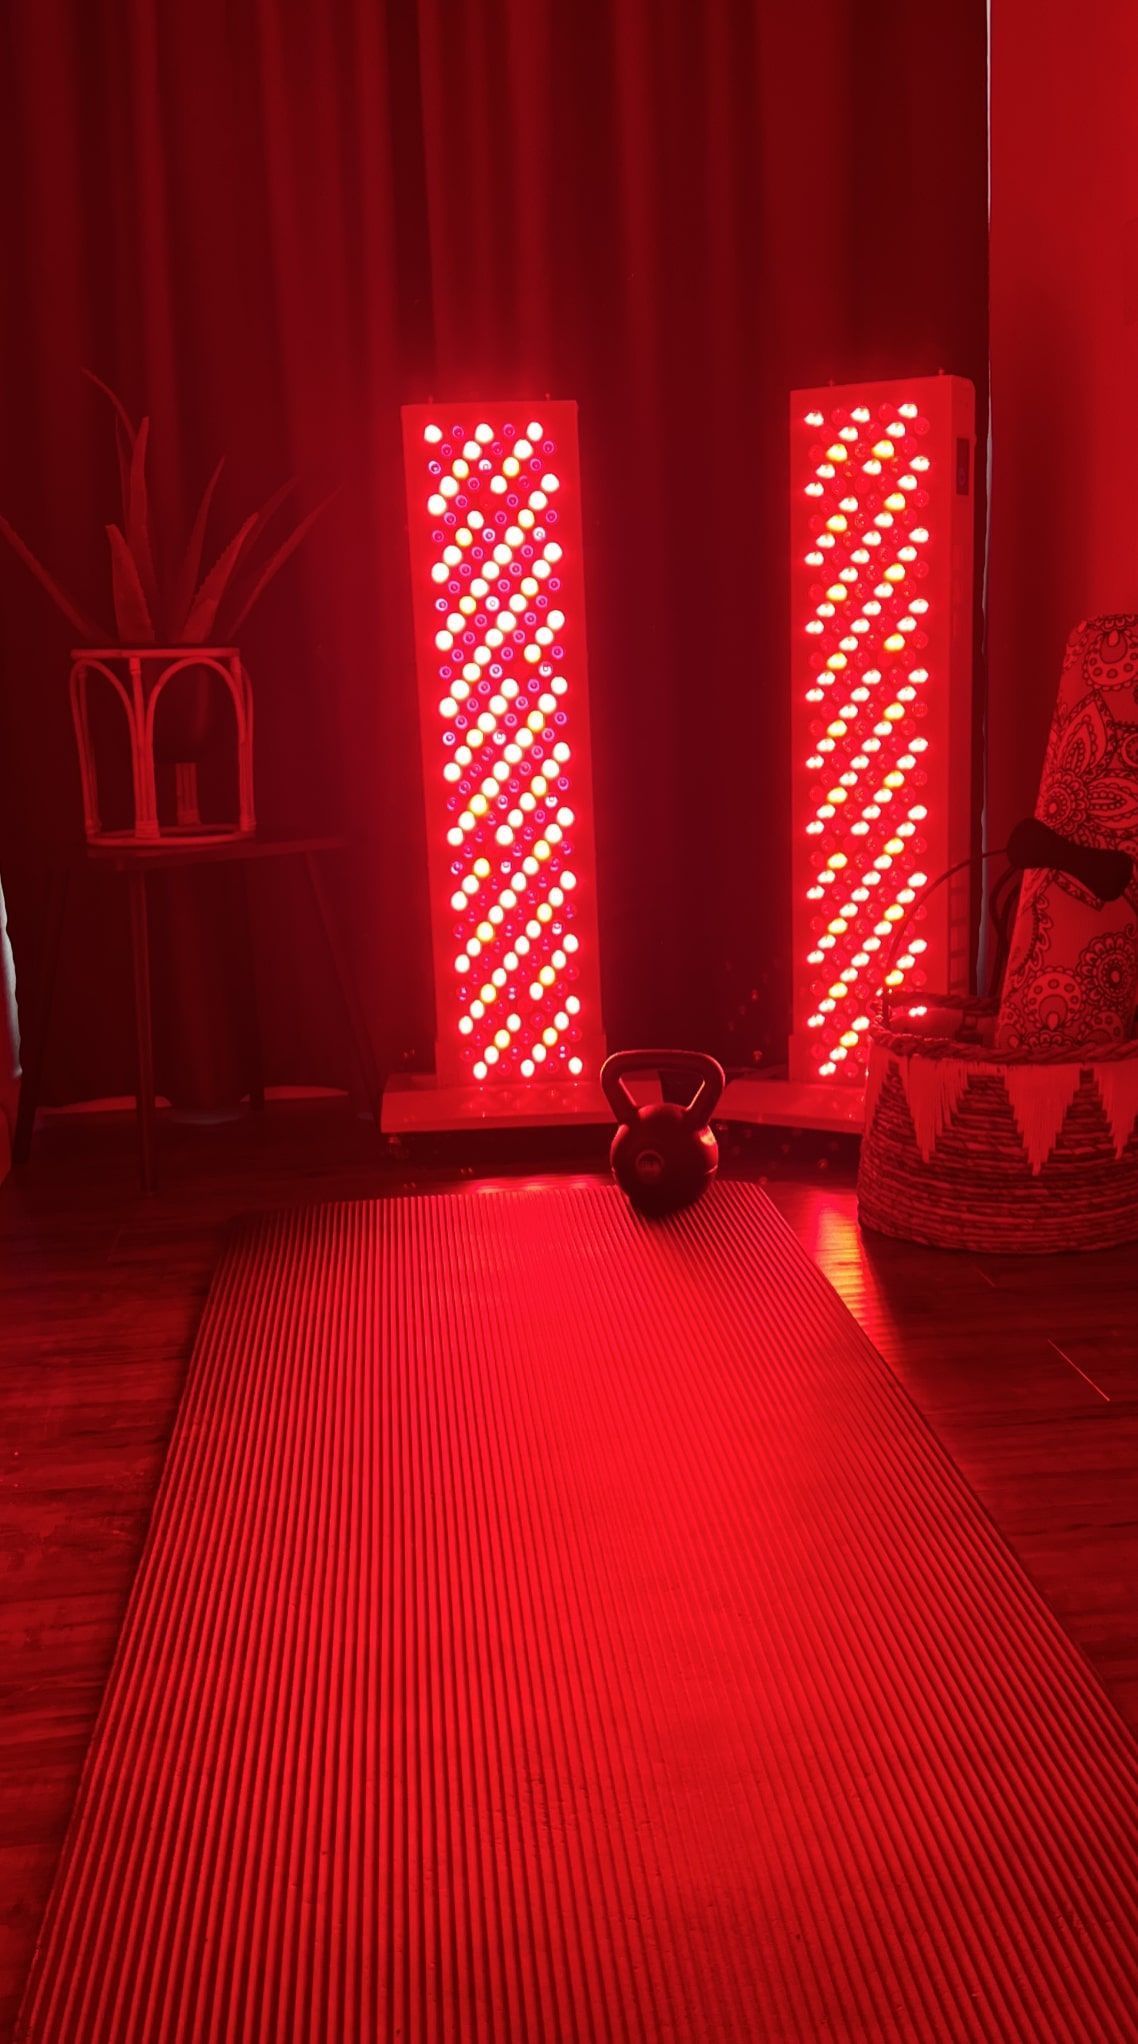 A red light is shining on a yoga mat in a living room.